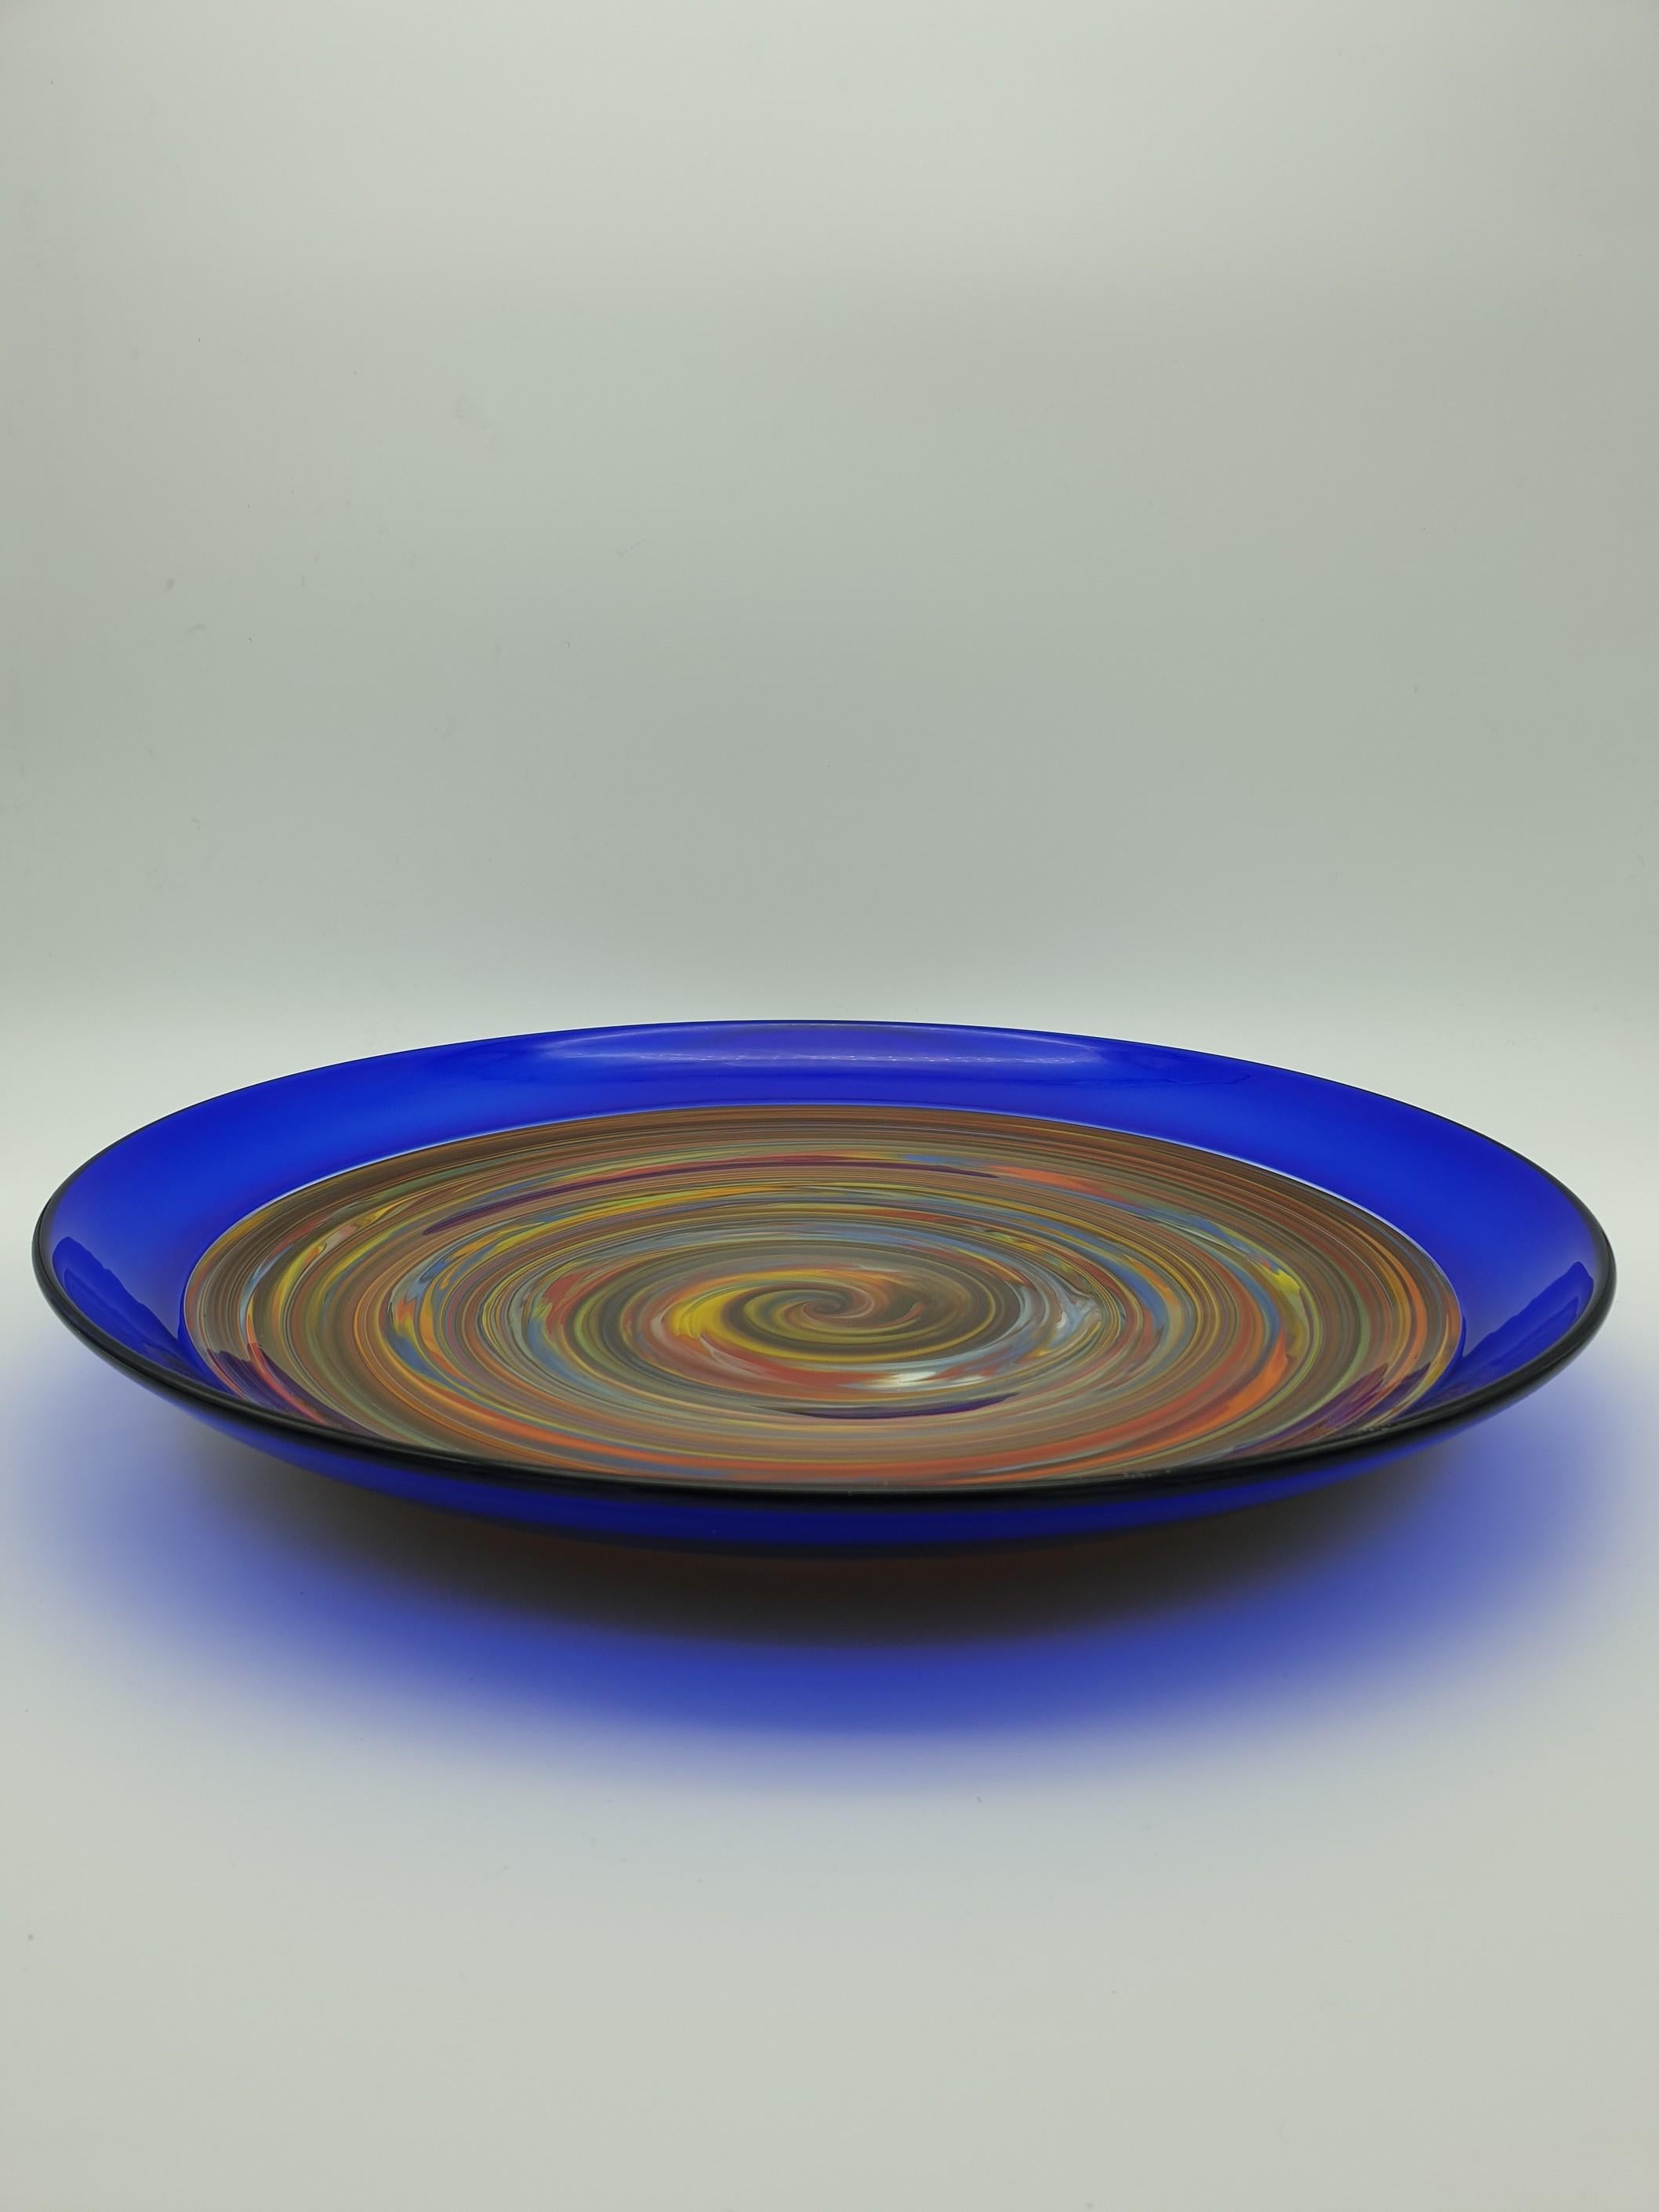 This modern stylish centerpiece / dish / platter by Gino Cenedese e Figlio has been handmade in Murano in the late 1990s. The beautiful central multi-color rainbow has been obtained by swirling glass canes of different color while hot-working the